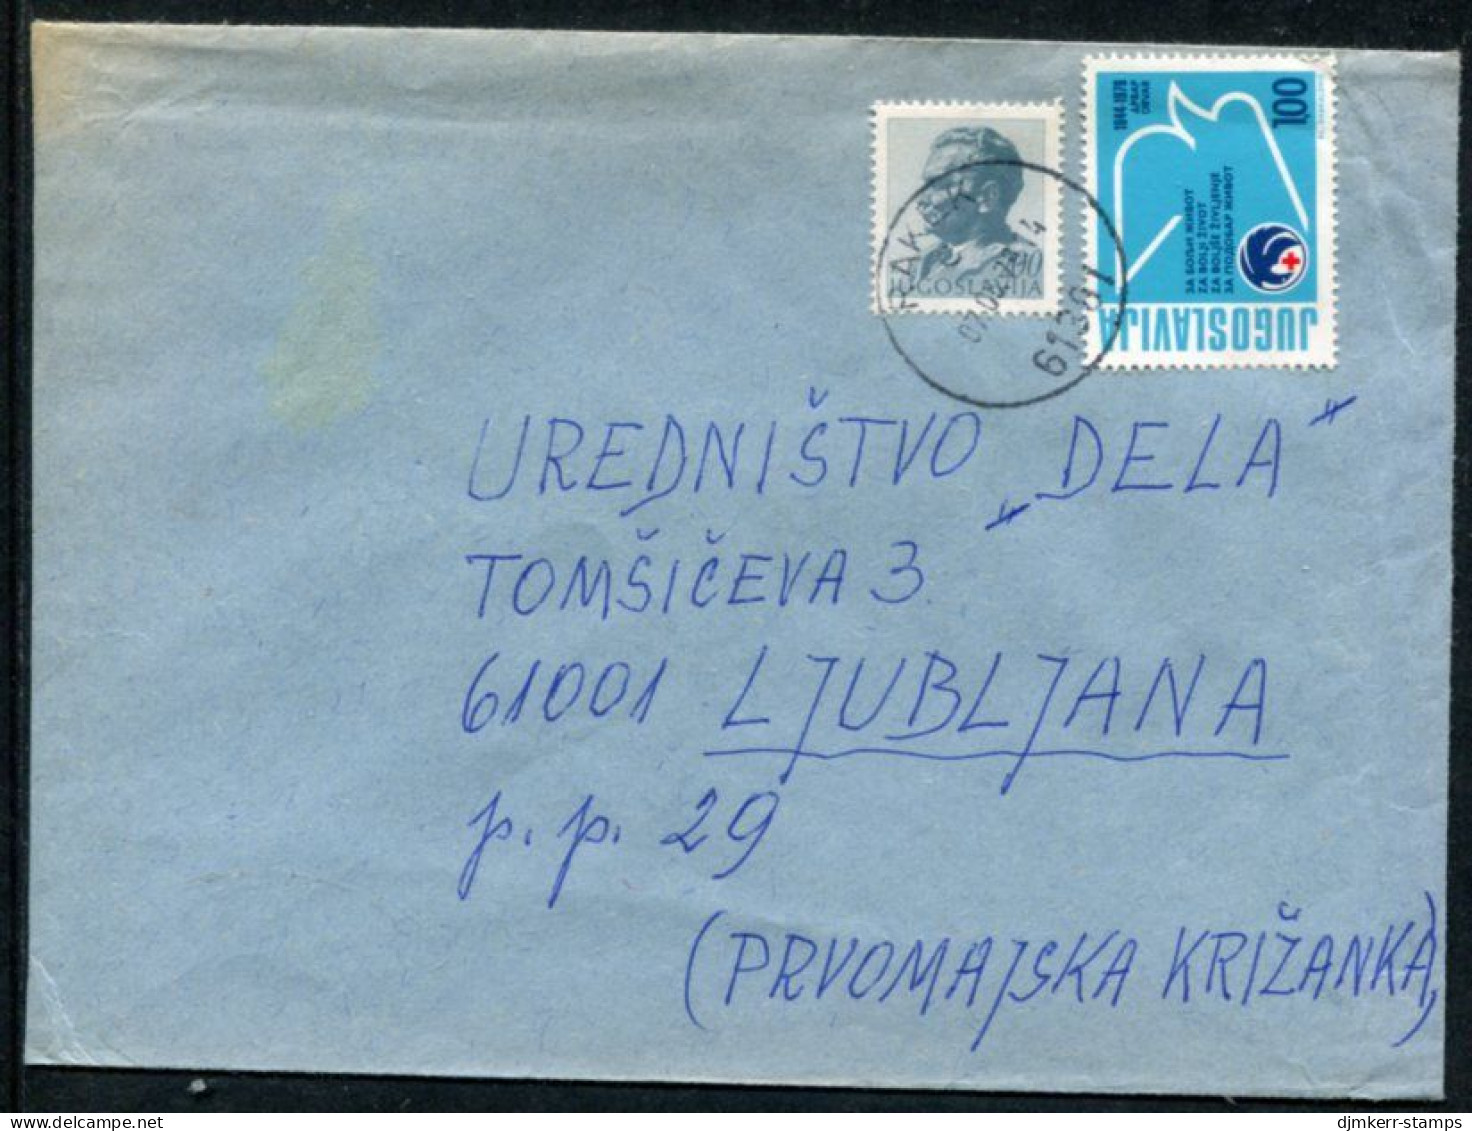 YUGOSLAVIA 1979 Red Cross Tax. Used On Commercial Cover.  Michel ZZM 64 - Wohlfahrtsmarken